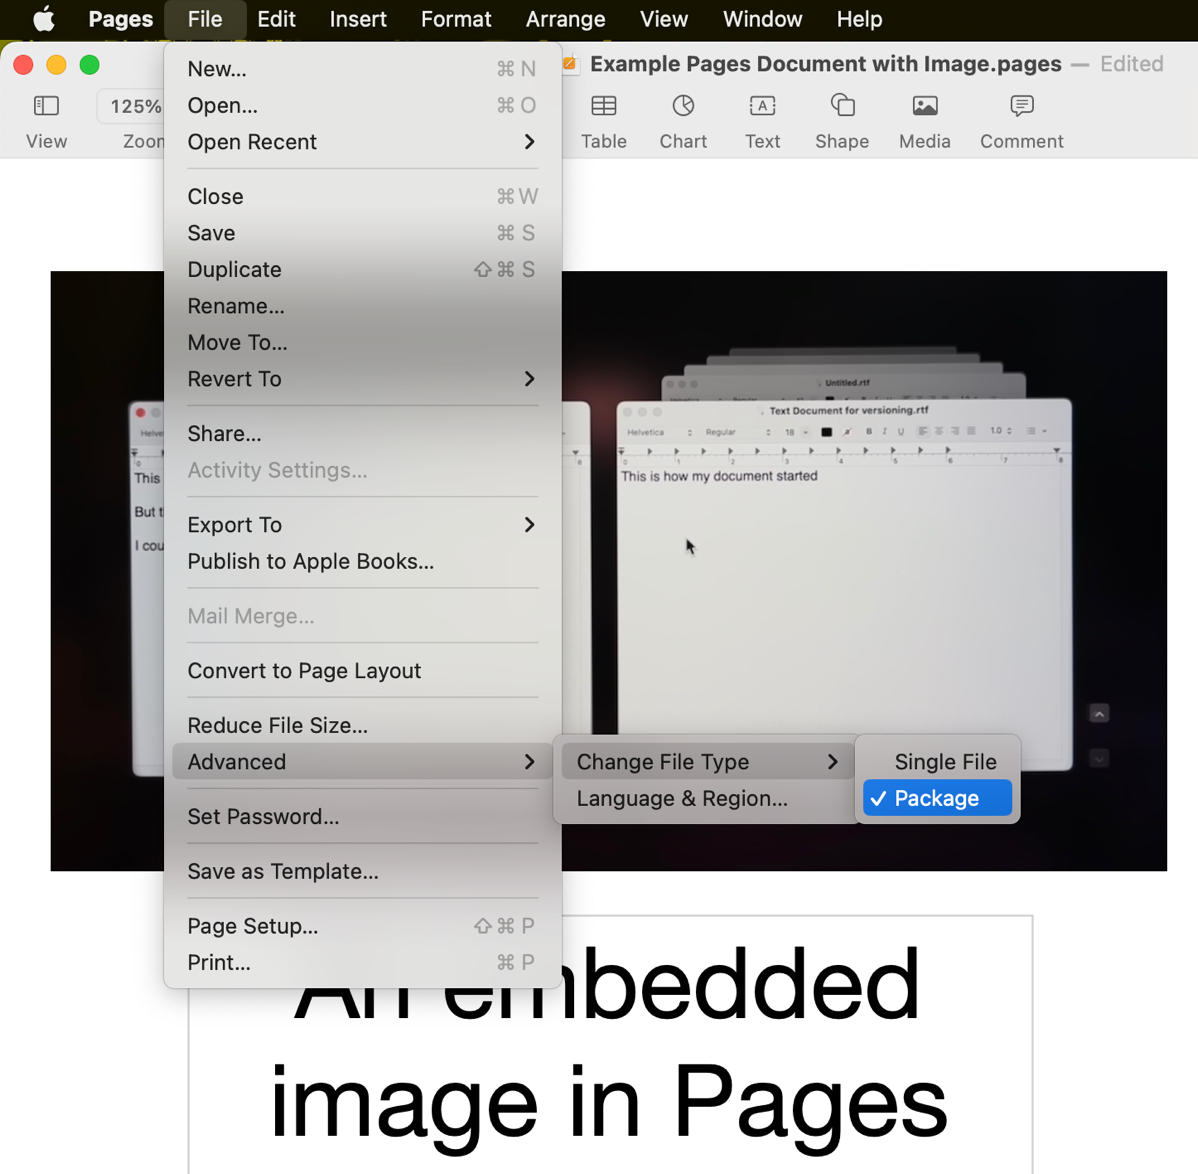 Pages Change File Type to Package